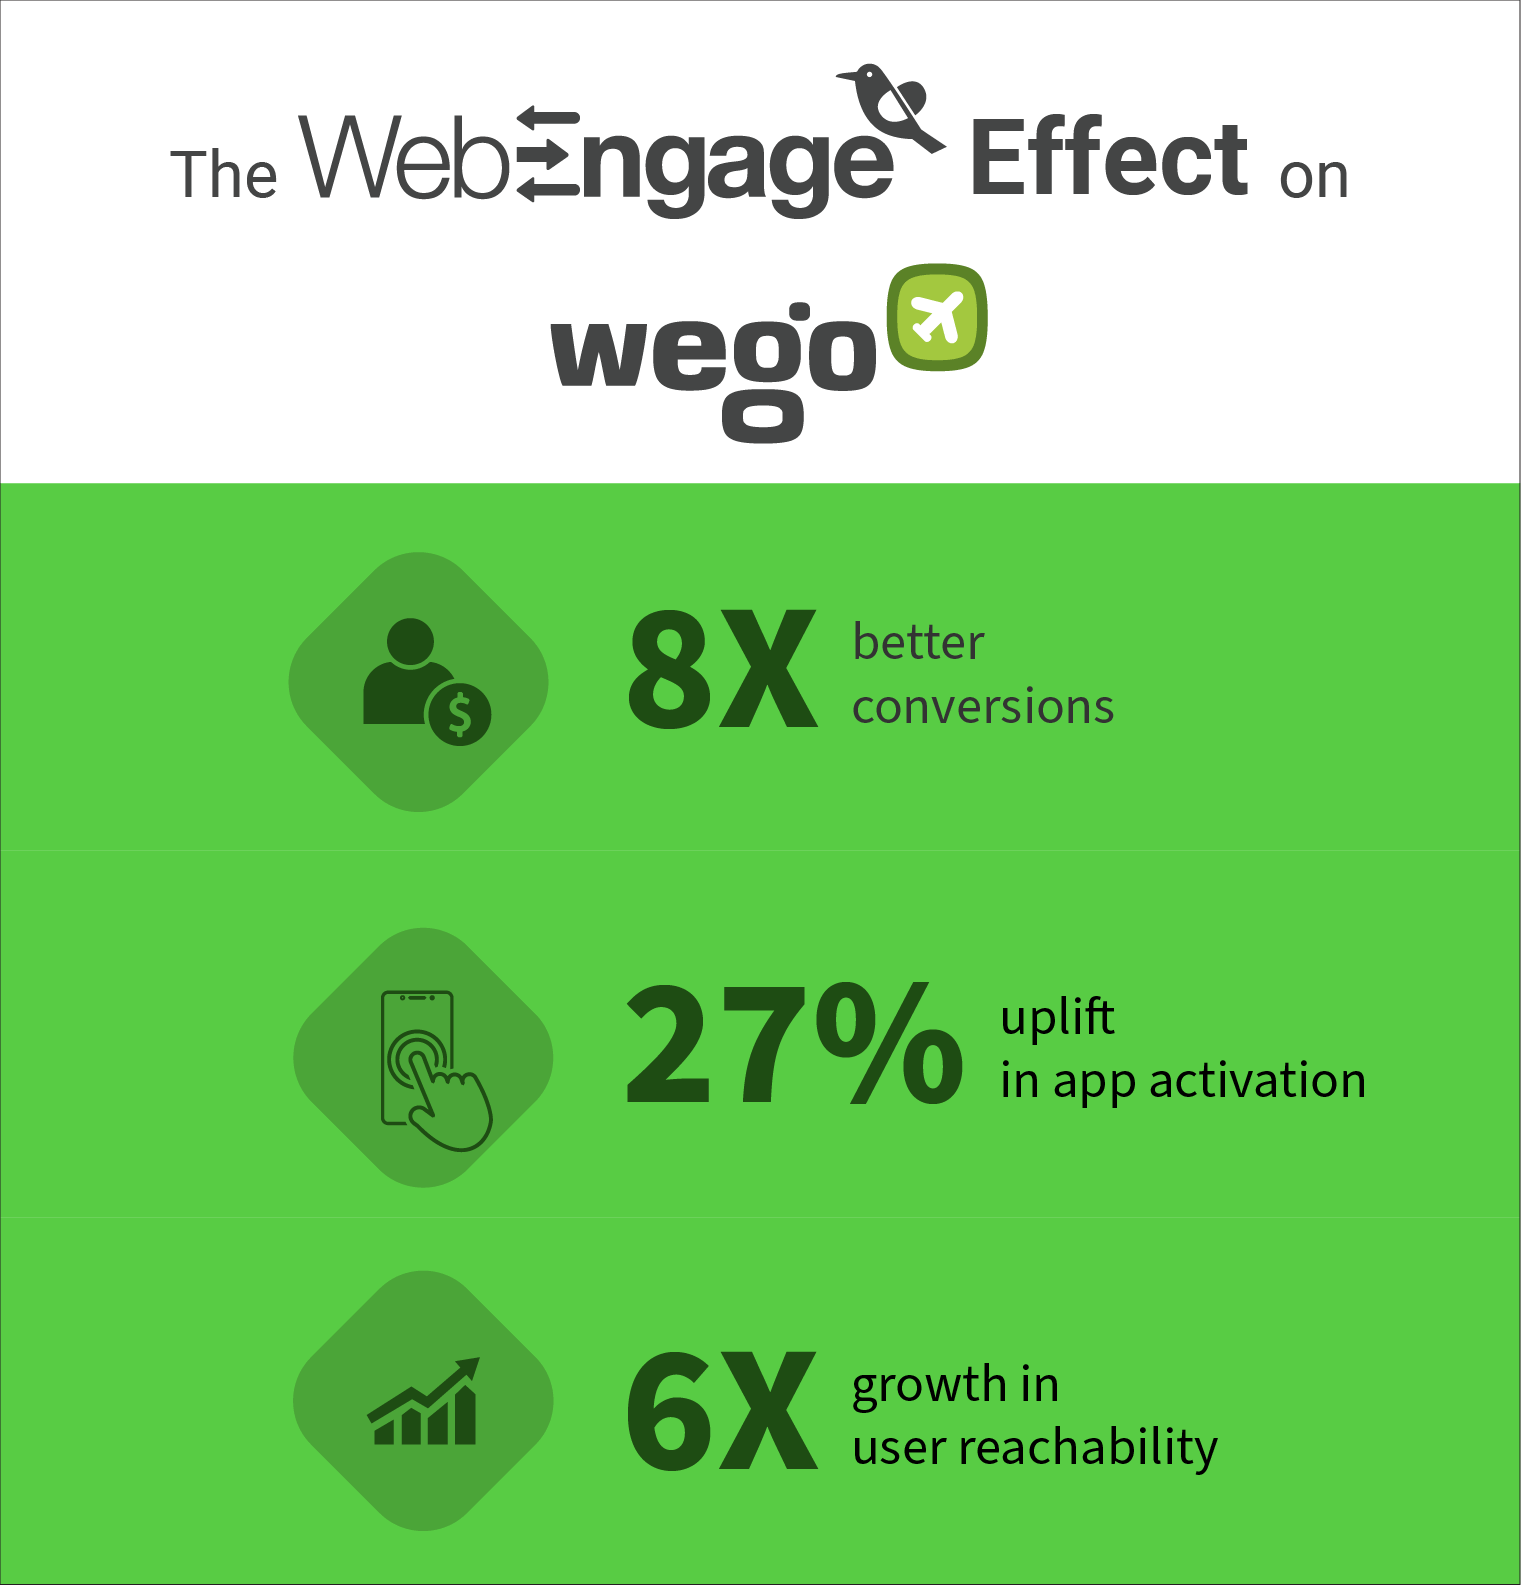 Wego boosts its conversions by 8X | Case Study